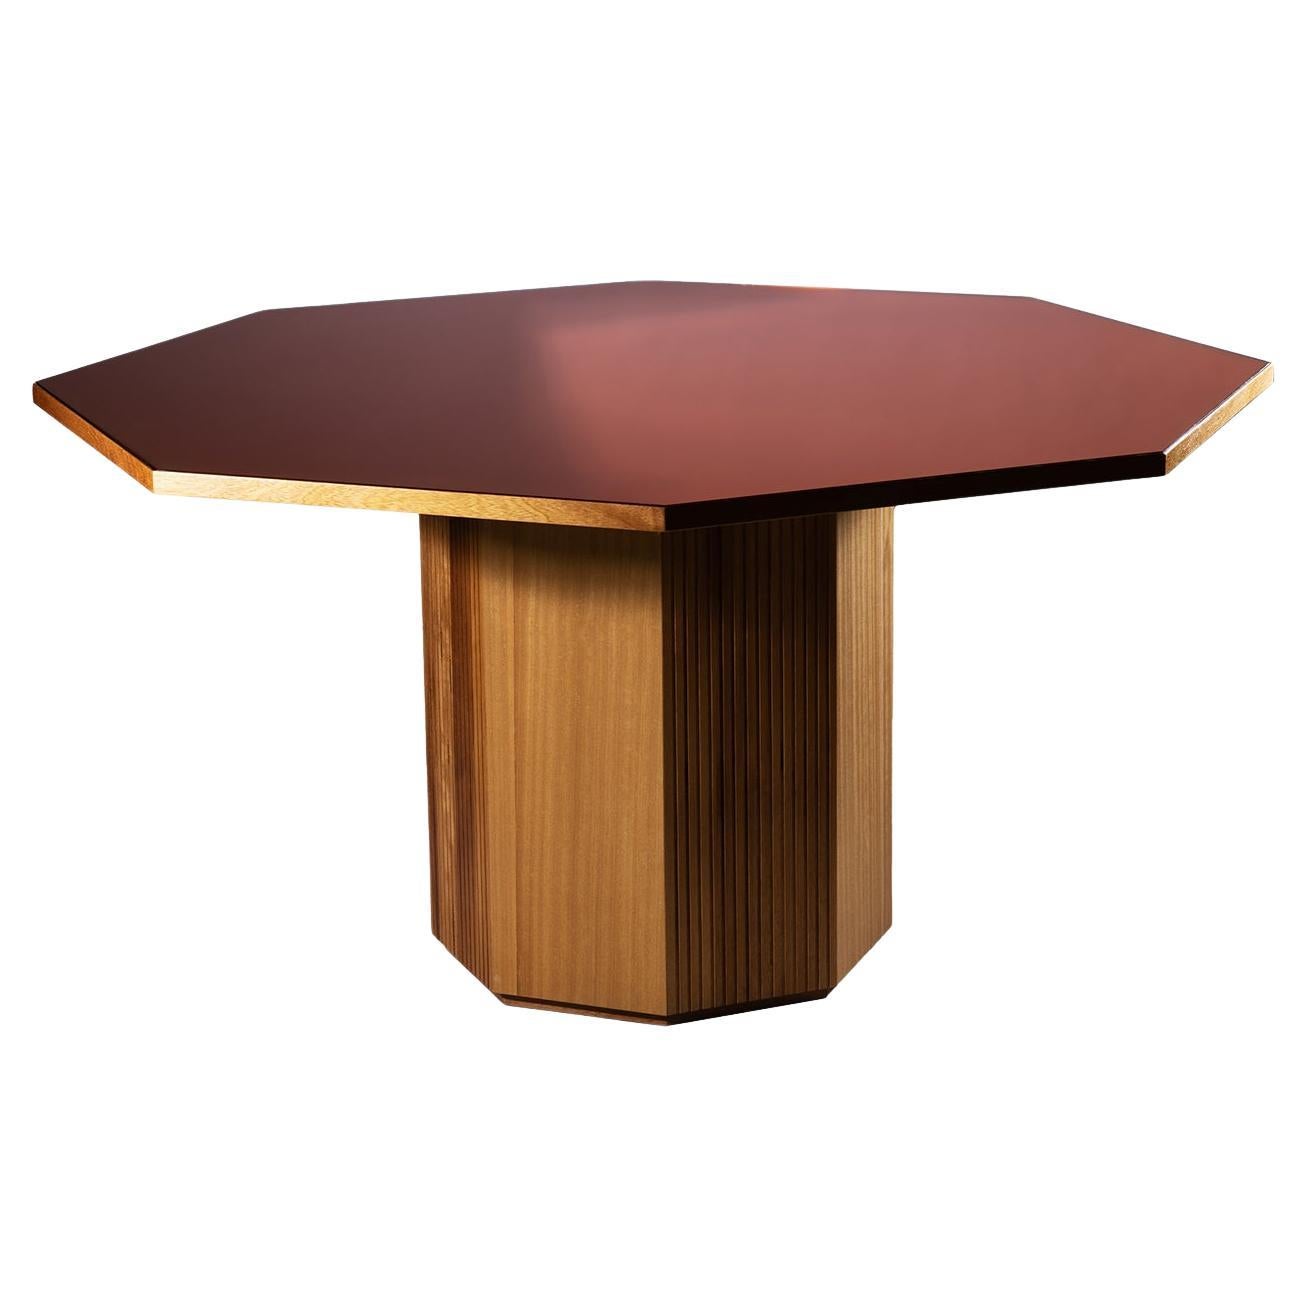 Gino 140 Glass and Wood Orange Dining Table